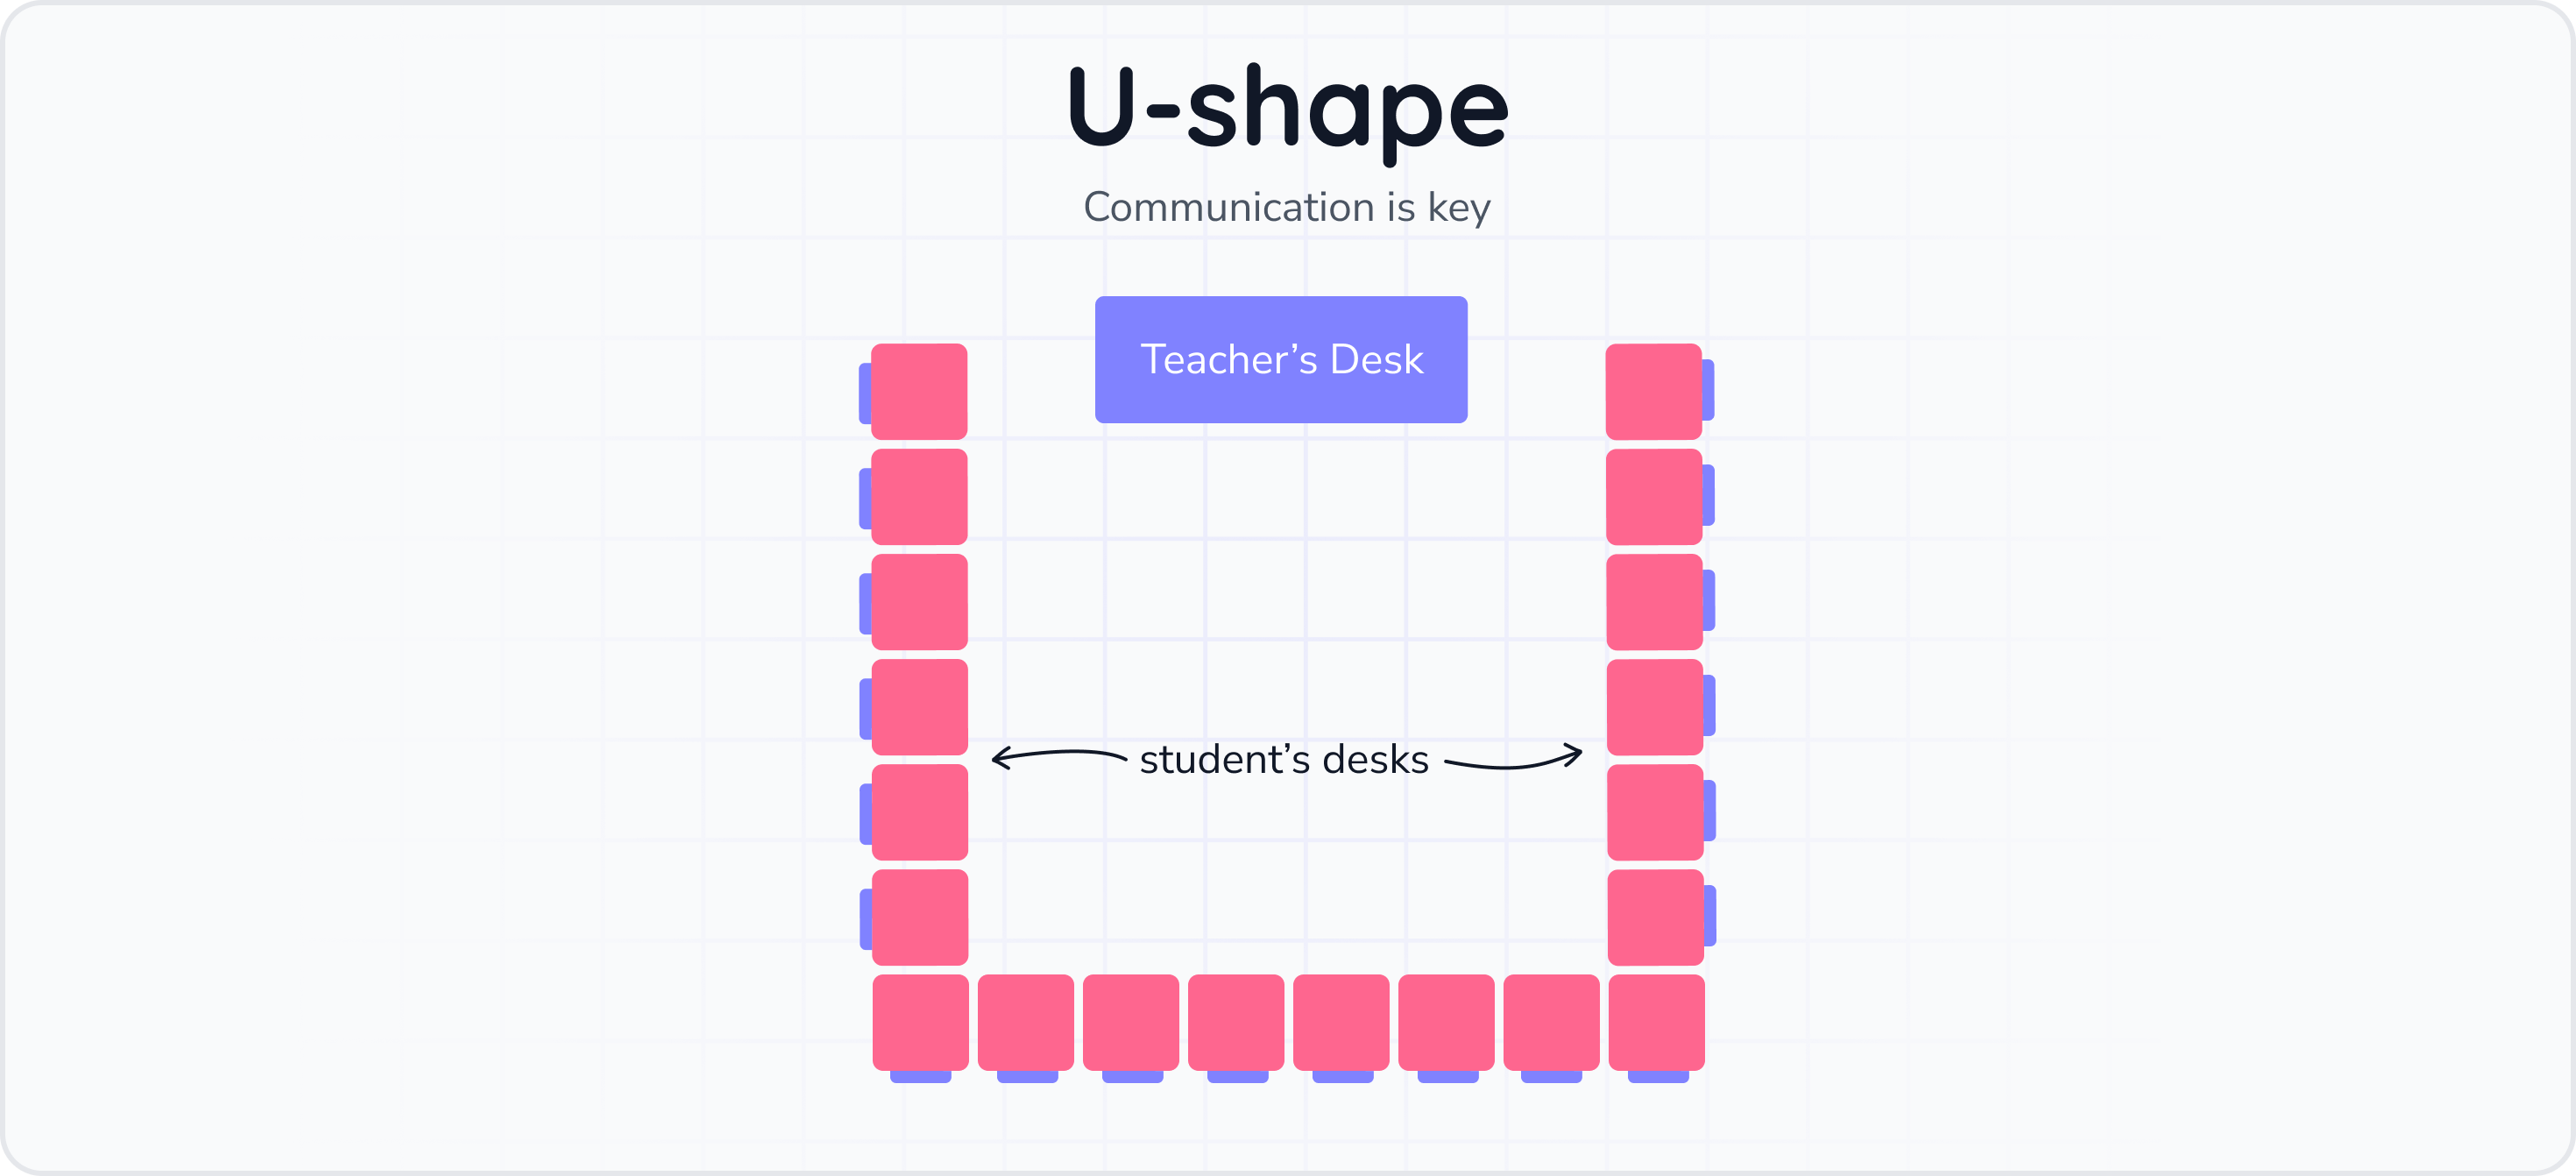 This image shows the layout of a U-shape seating plan, including where the teacher's desk and student's desks are located.